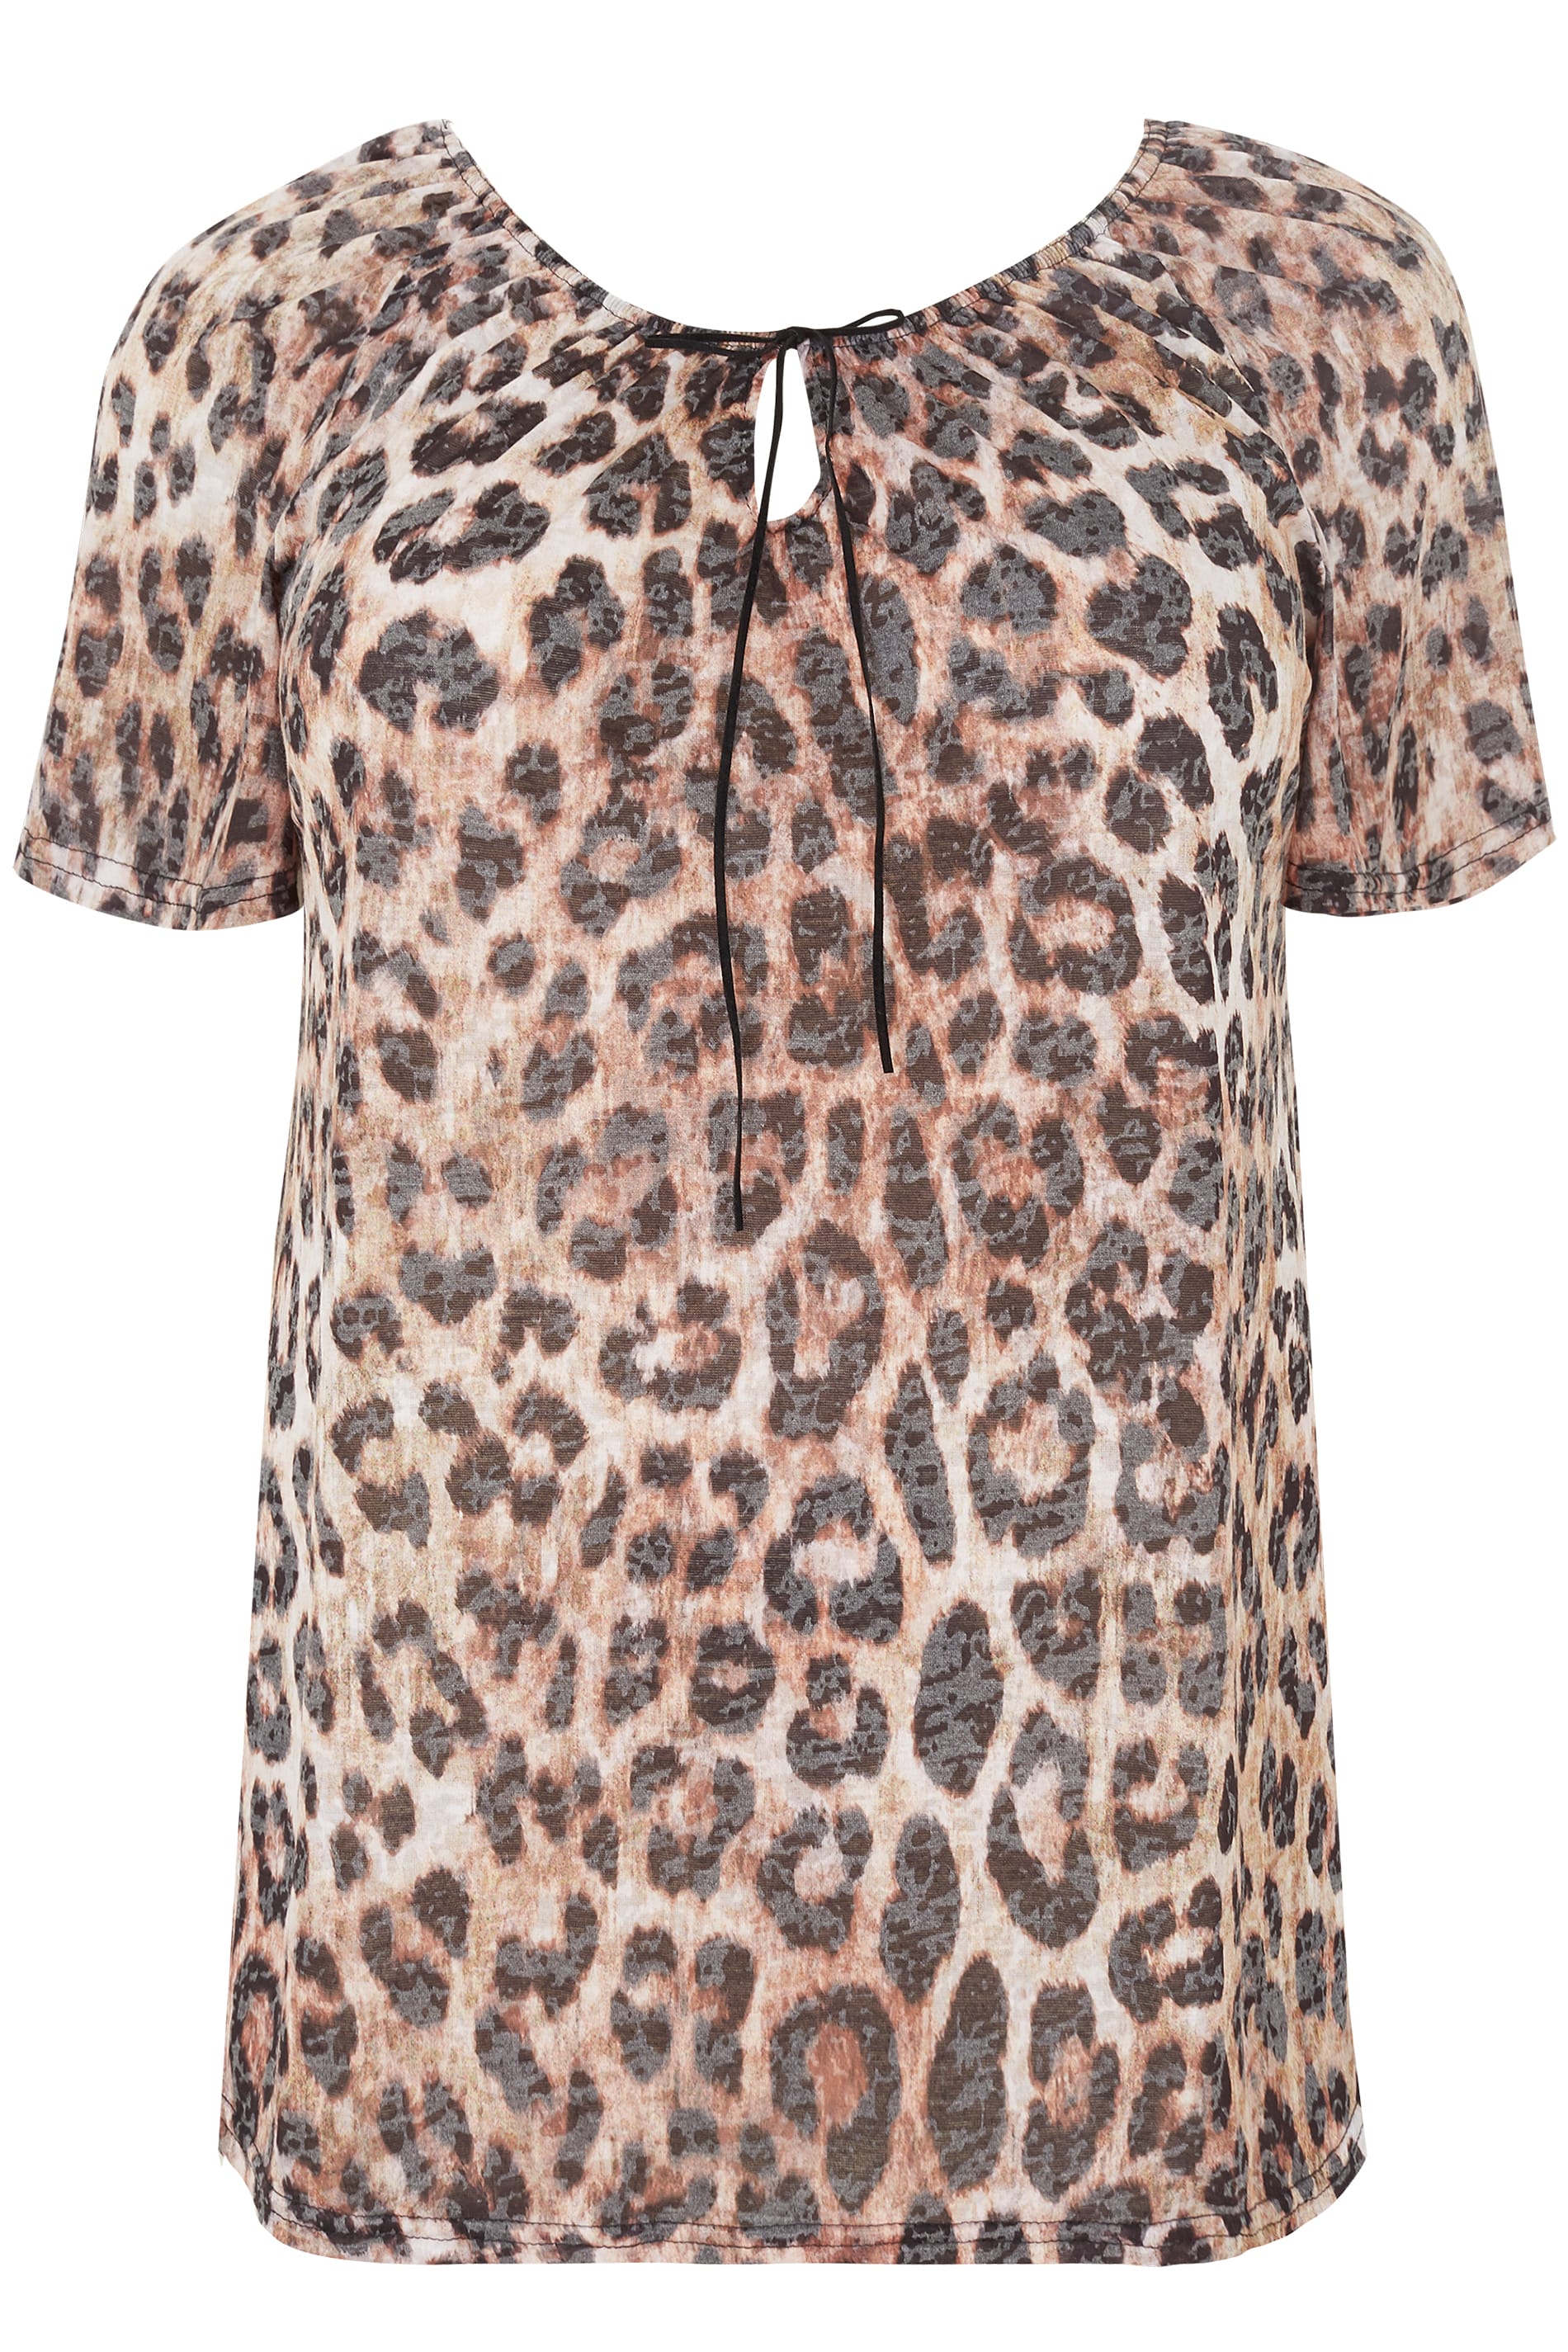 Leopard Print Gypsy Top, plus size 16 to 36